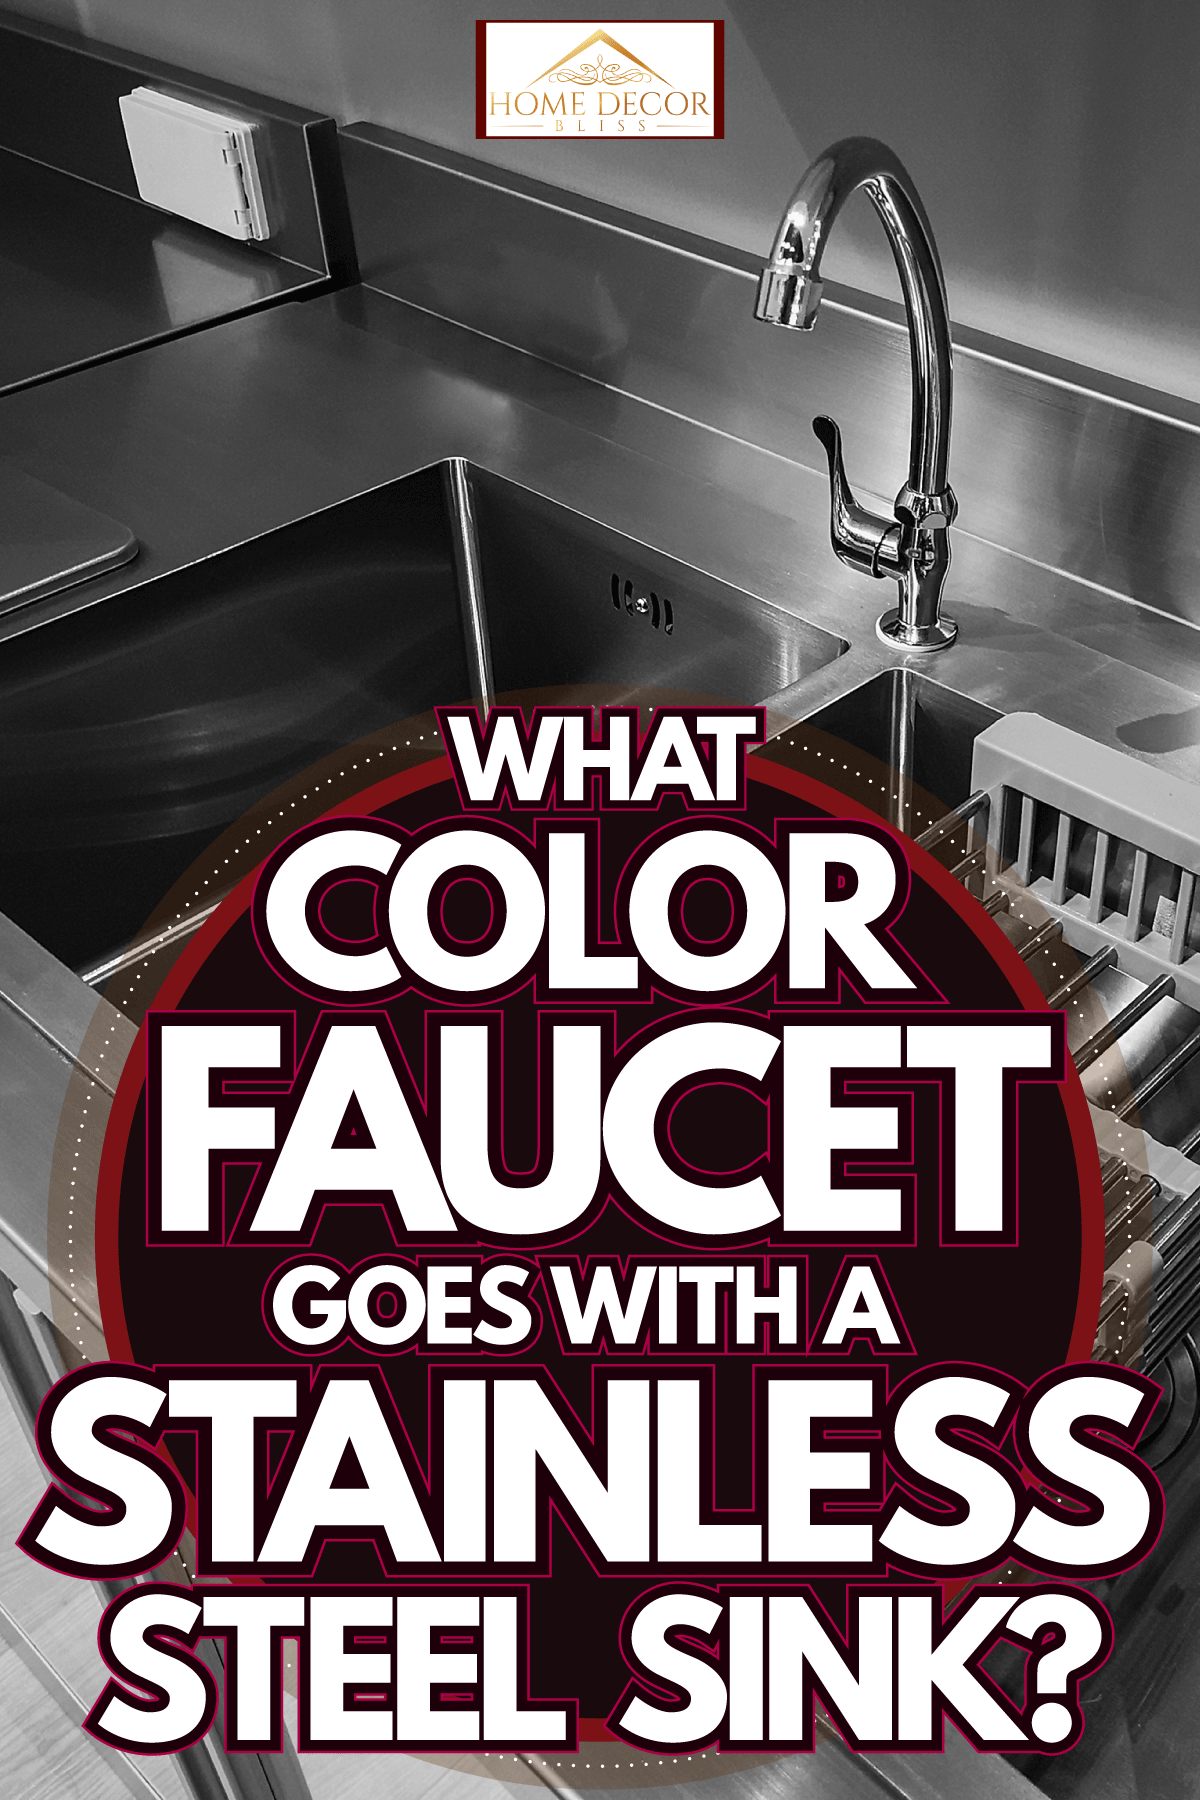 A stainless steel double sink in the kitchen, What Color Faucet Goes With A Stainless Steel Sink?